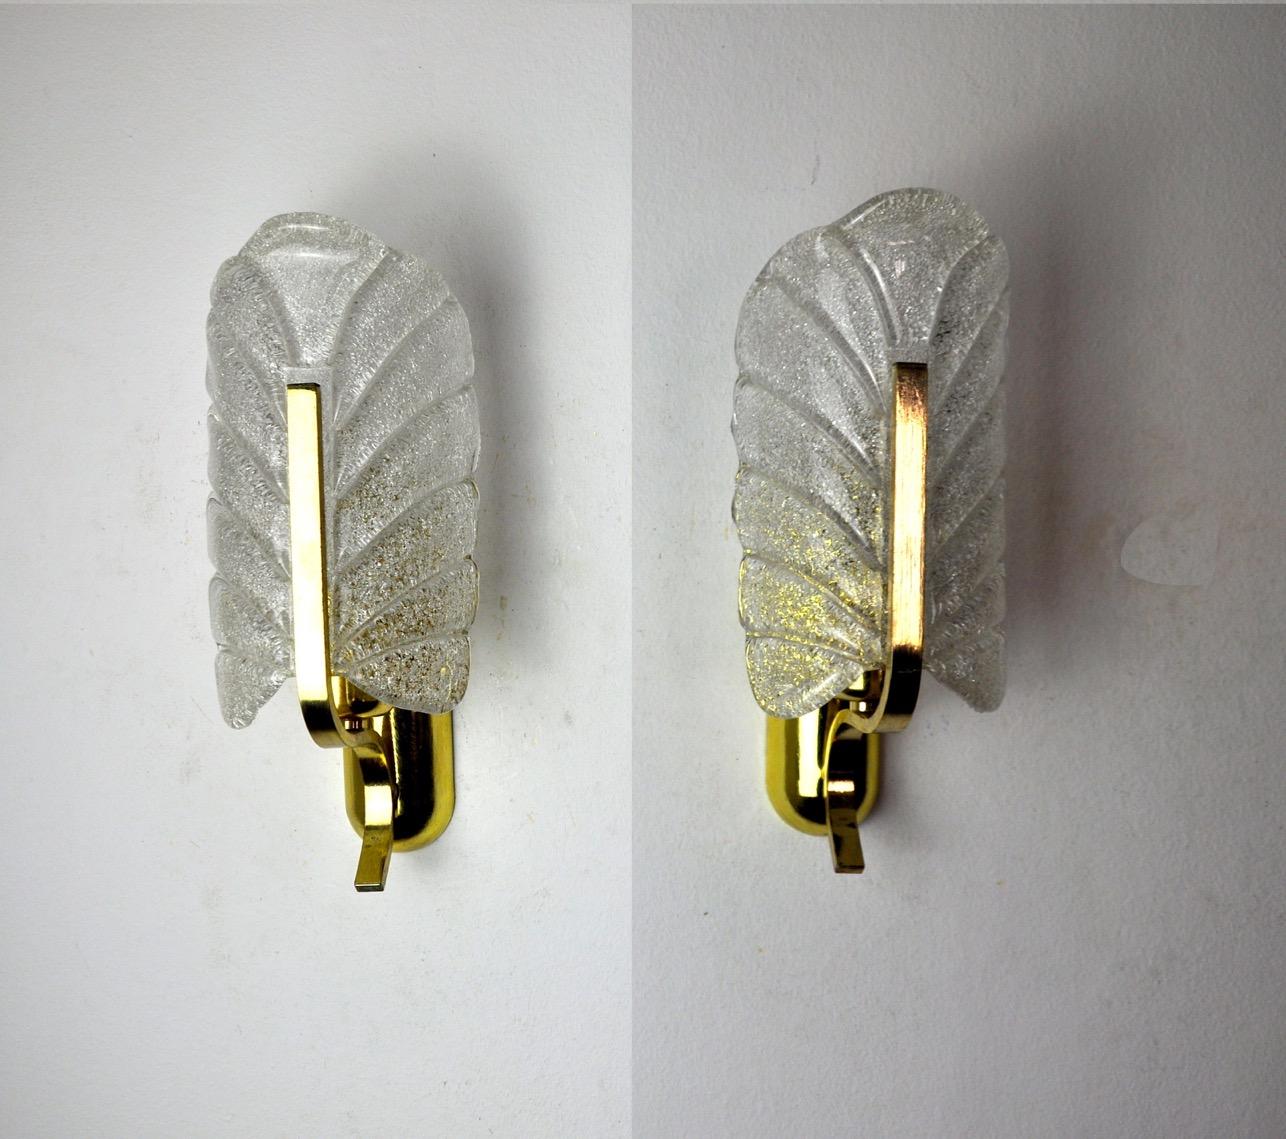 Very nice pair of carl fagerlund sconces for lyfa dating from the 70s. The sconces are composed of a gilded metal structure and leaf-shaped frosted glass. The diffused light is soft and harmonious, perfect for illuminating your interior. Mark of